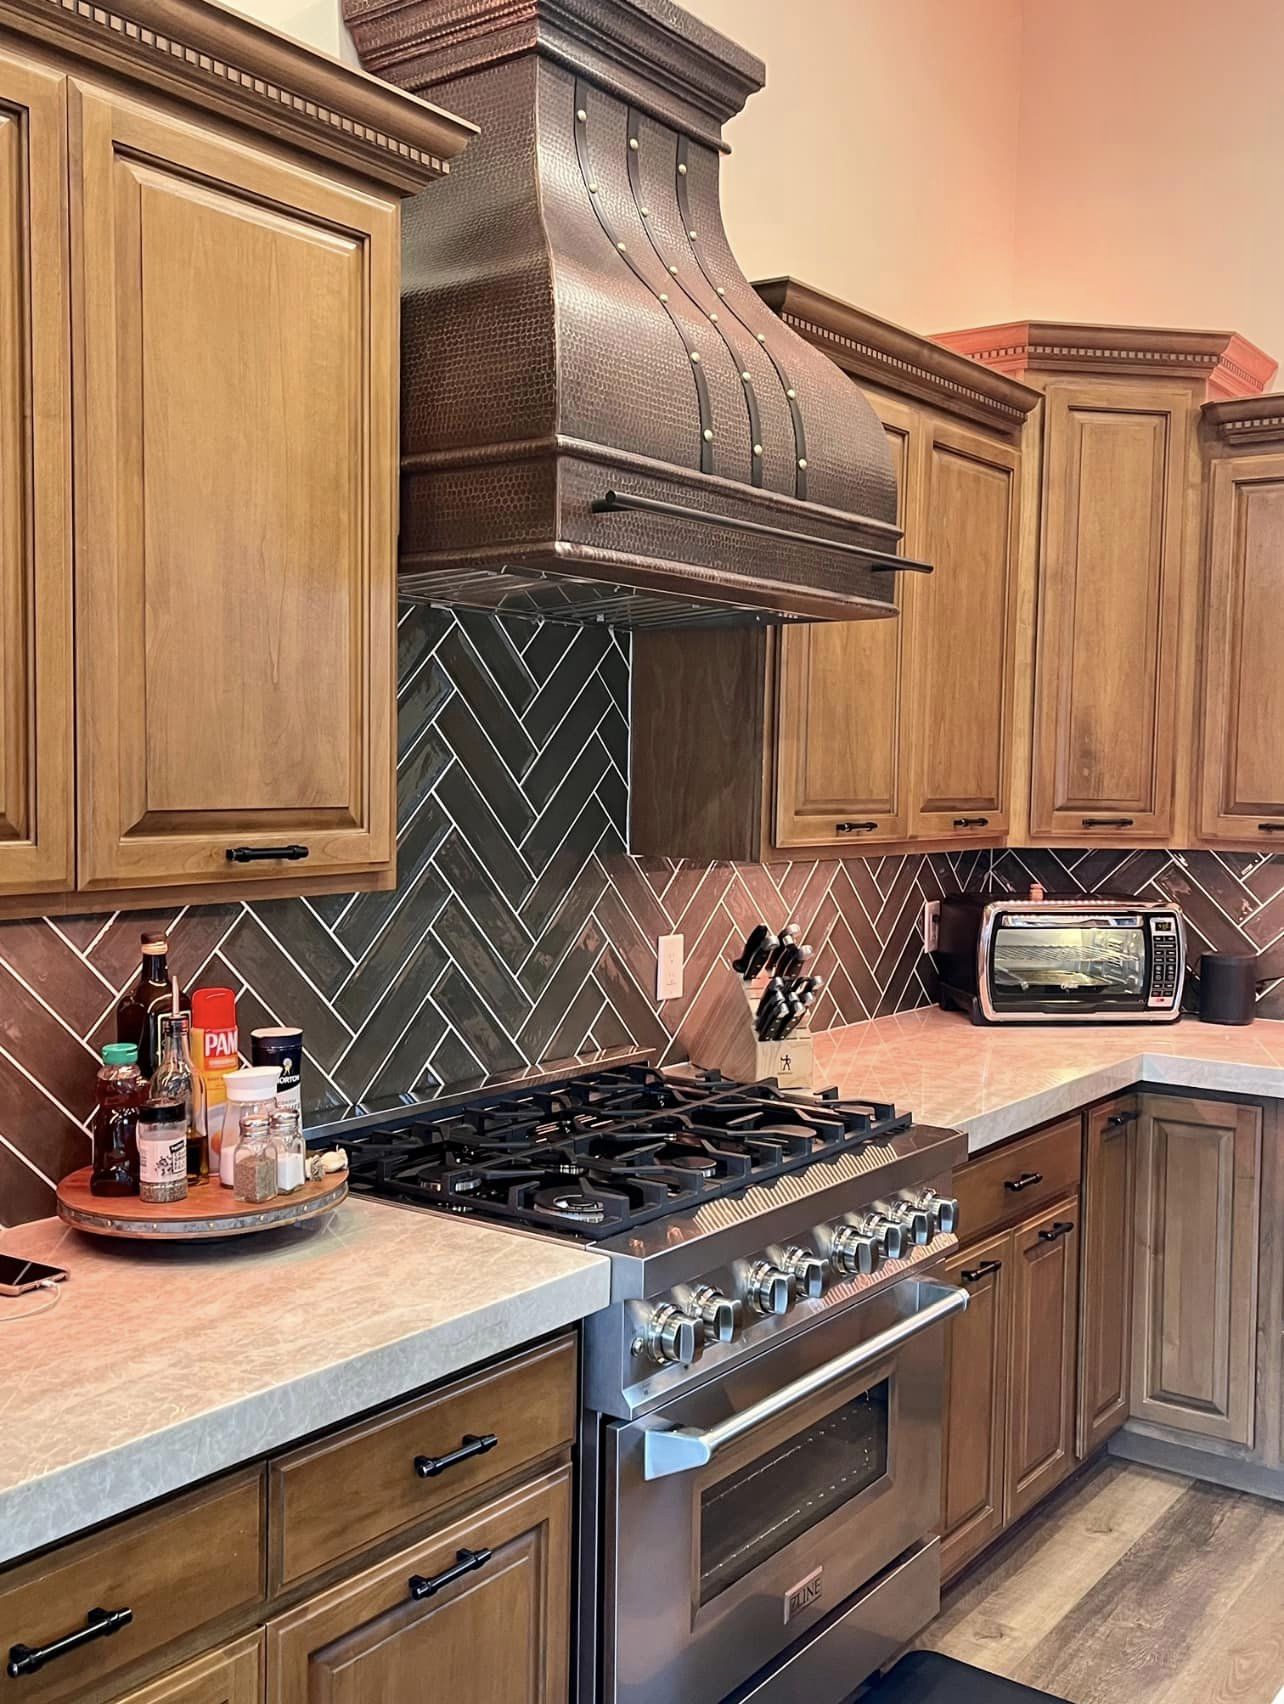 A french kitchen design with brown kitchen cabinets features a range hood, complemented, marble kitchen countertops beautiful marble backsplash